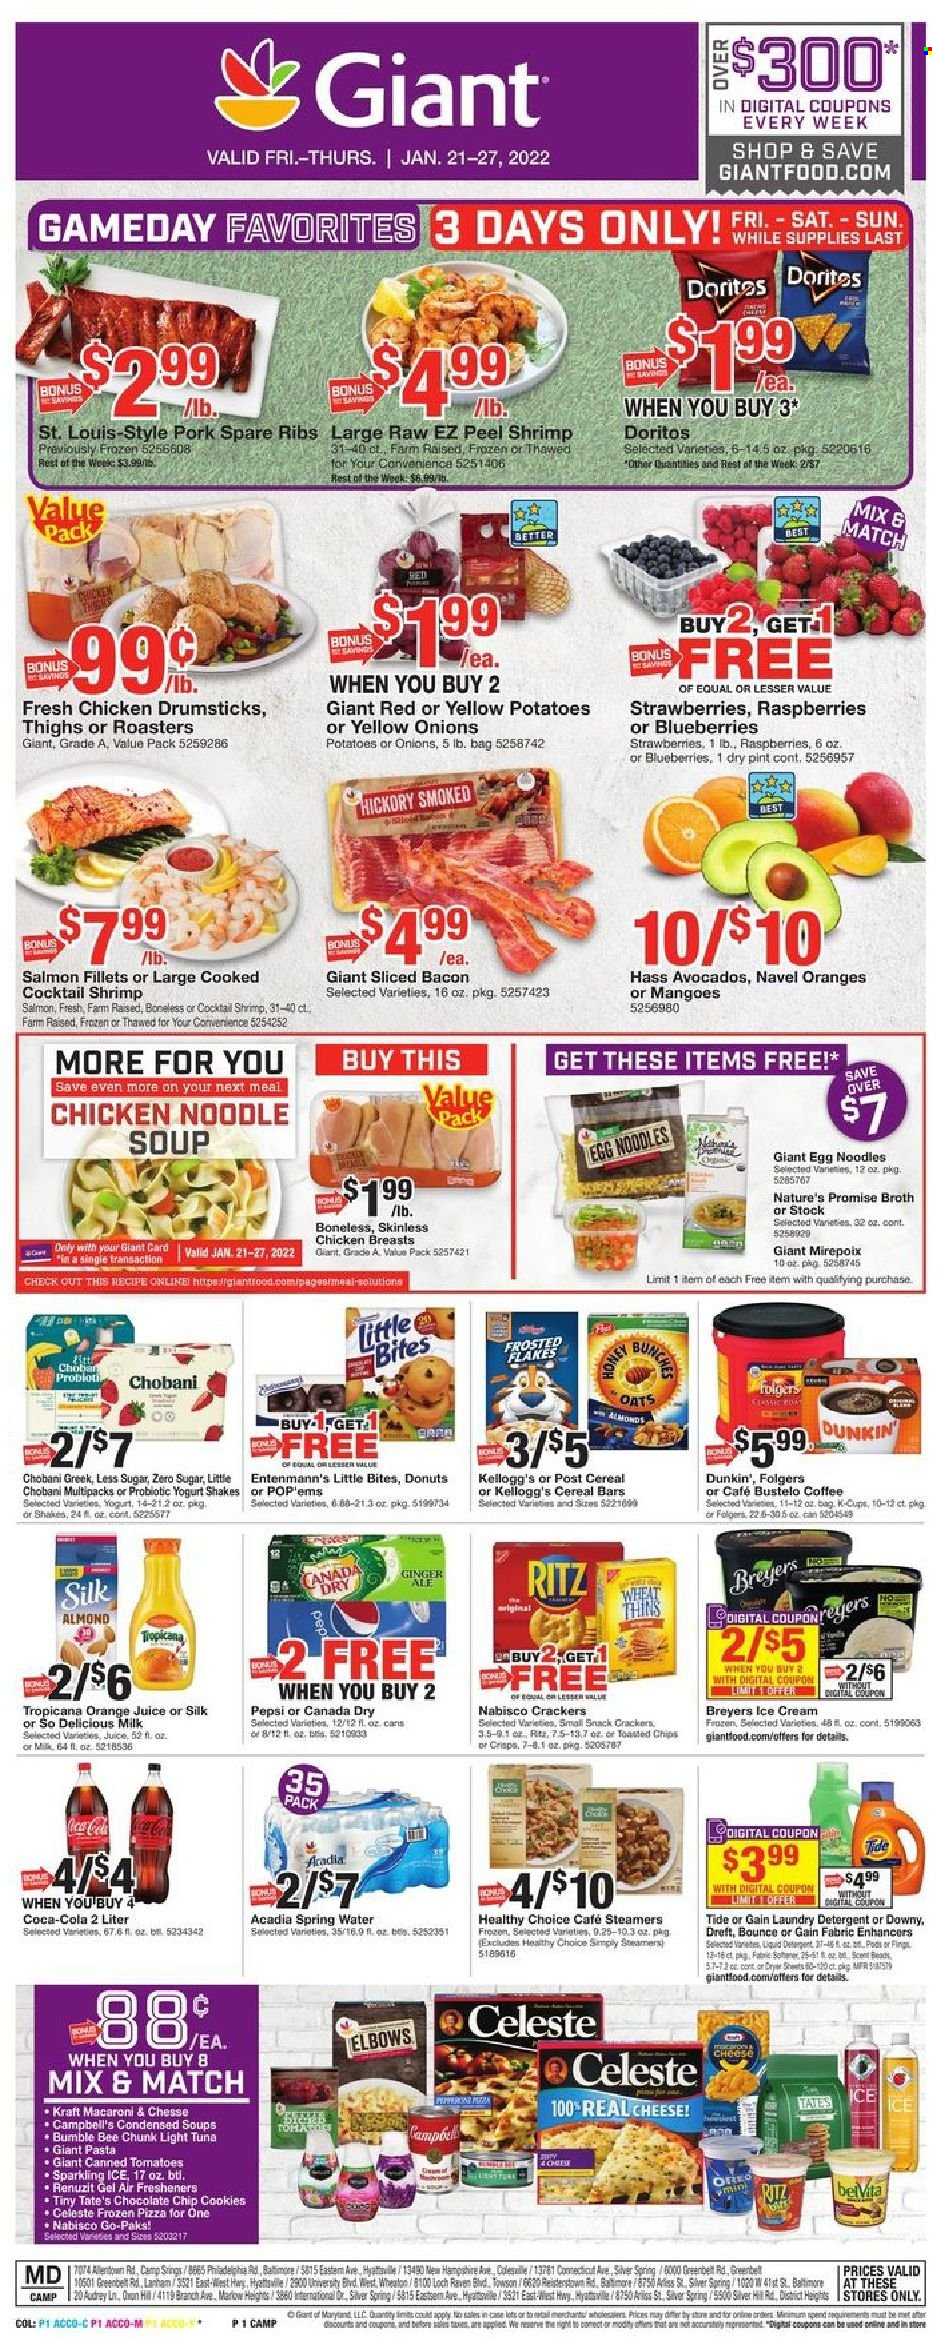 thumbnail - Giant Food Flyer - 01/21/2022 - 01/27/2022 - Sales products - Nature’s Promise, donut, Entenmann's, potatoes, avocado, blueberries, mango, strawberries, salmon, salmon fillet, tuna, shrimps, Campbell's, pizza, macaroni, soup, pasta, Bumble Bee, noodles cup, noodles, Healthy Choice, Kraft®, bacon, Oreo, yoghurt, probiotic yoghurt, Chobani, milk, Silk, shake, ice cream, Celeste, cookies, snack, cereal bar, crackers, Kellogg's, Little Bites, RITZ, Doritos, Thins, oats, broth, light tuna, cereals, egg noodles, honey, Canada Dry, Coca-Cola, ginger ale, Pepsi, orange juice, juice, spring water, Acadia, coffee, Folgers, coffee capsules, K-Cups, wine, chicken breasts, chicken drumsticks, pork meat, pork ribs, pork spare ribs, detergent, Gain, Tide, fabric softener, laundry detergent, Renuzit, air freshener, navel oranges. Page 1.